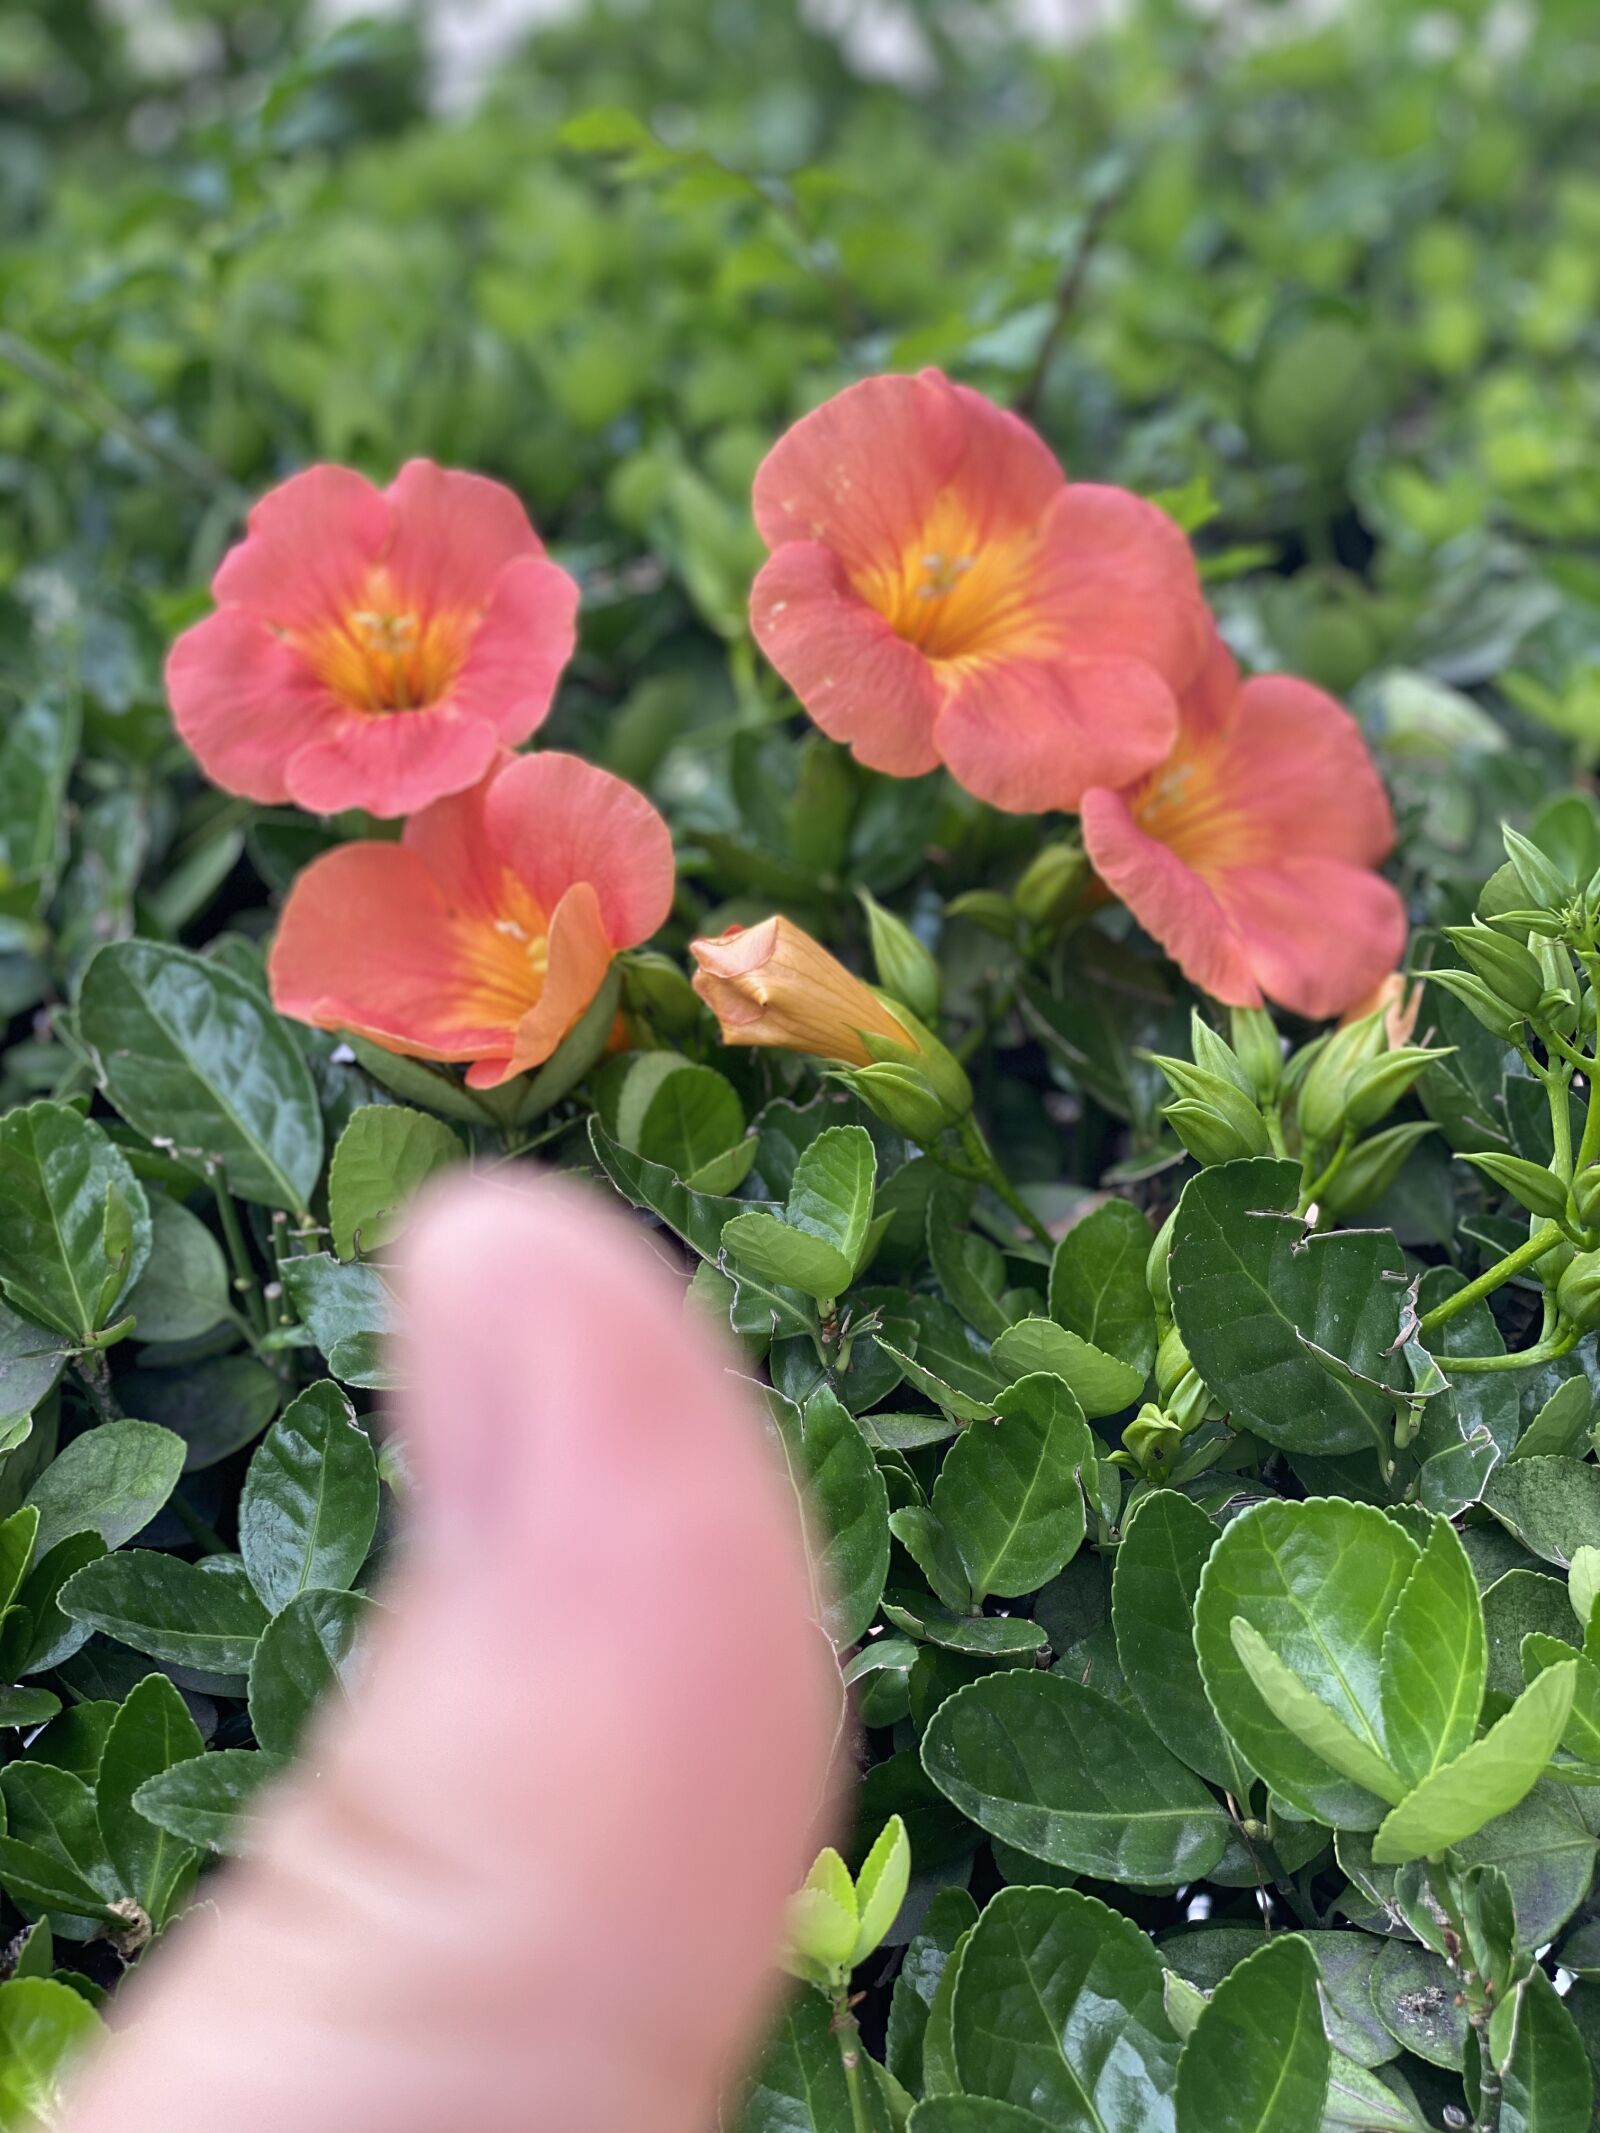 iPhone 11 Pro back dual camera 6mm f/2 sample photo. Flowers, a trumpet creeper photography